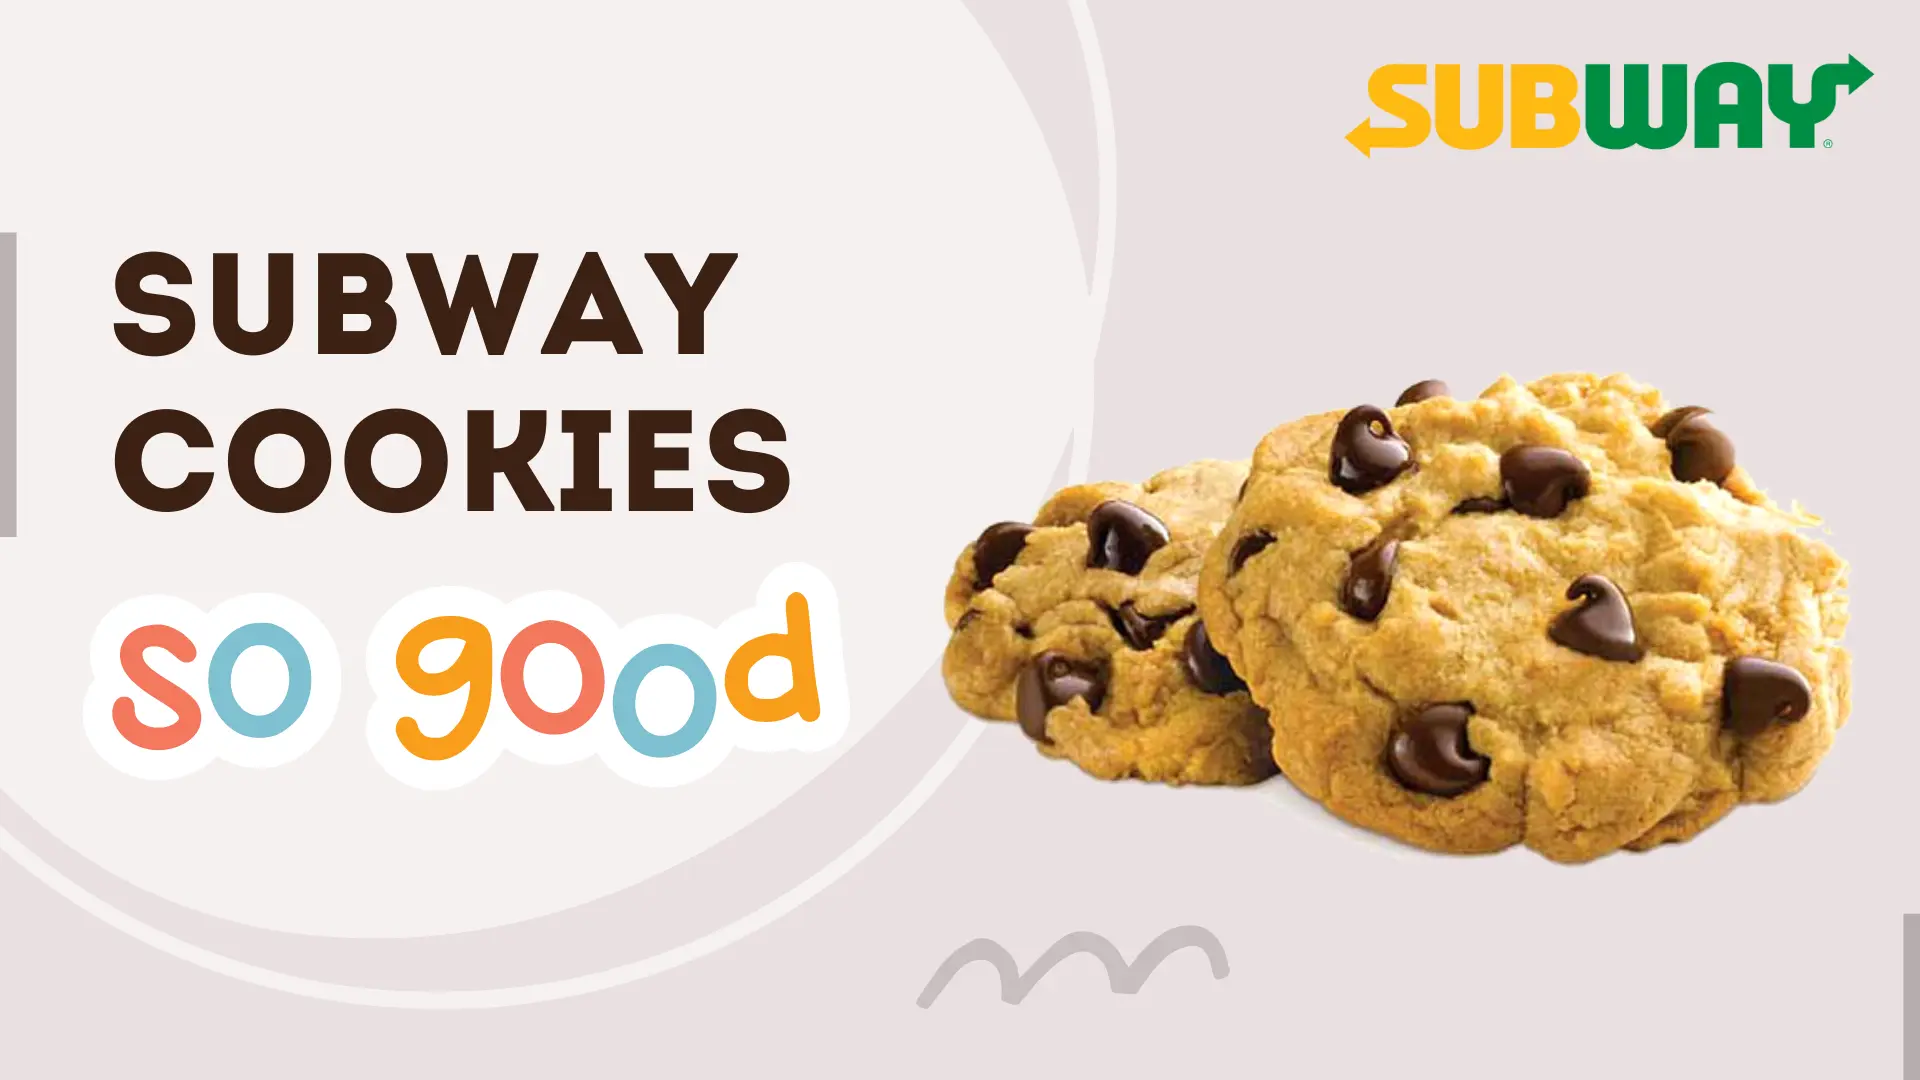 Wht are Subway Cookies so good